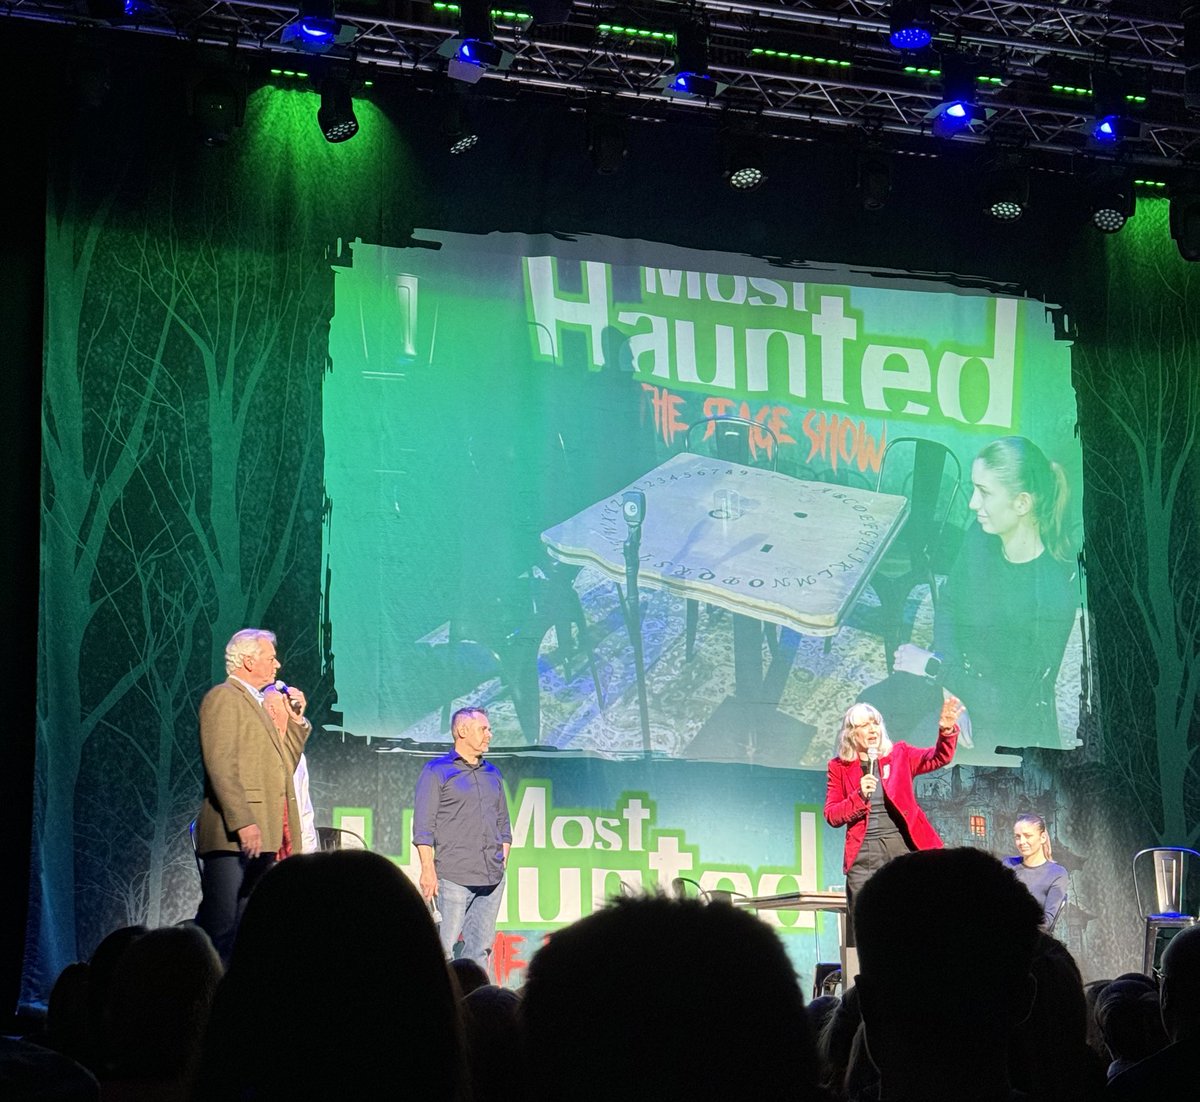 Most Haunted The Stage Show was amazing last night in Bolton!! @Yfielding and the team providing a great experience and full of laughter! Seeing really is believing 💚👻  #paranormal #ghosts #MostHaunted